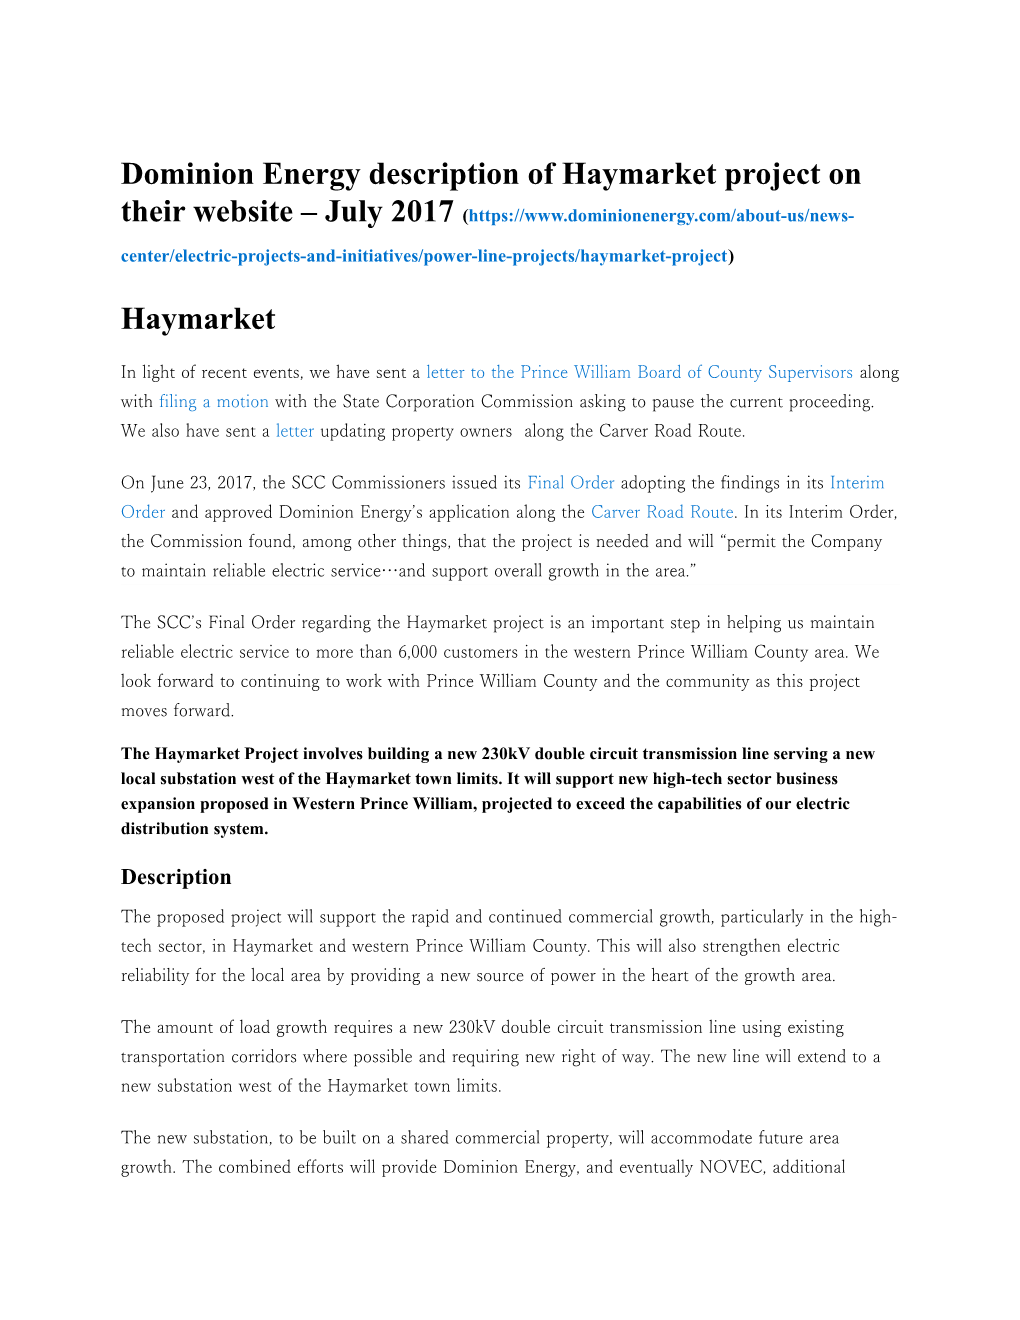 Dominion Energy Description of Haymarket Project on Their Website July 2017 (